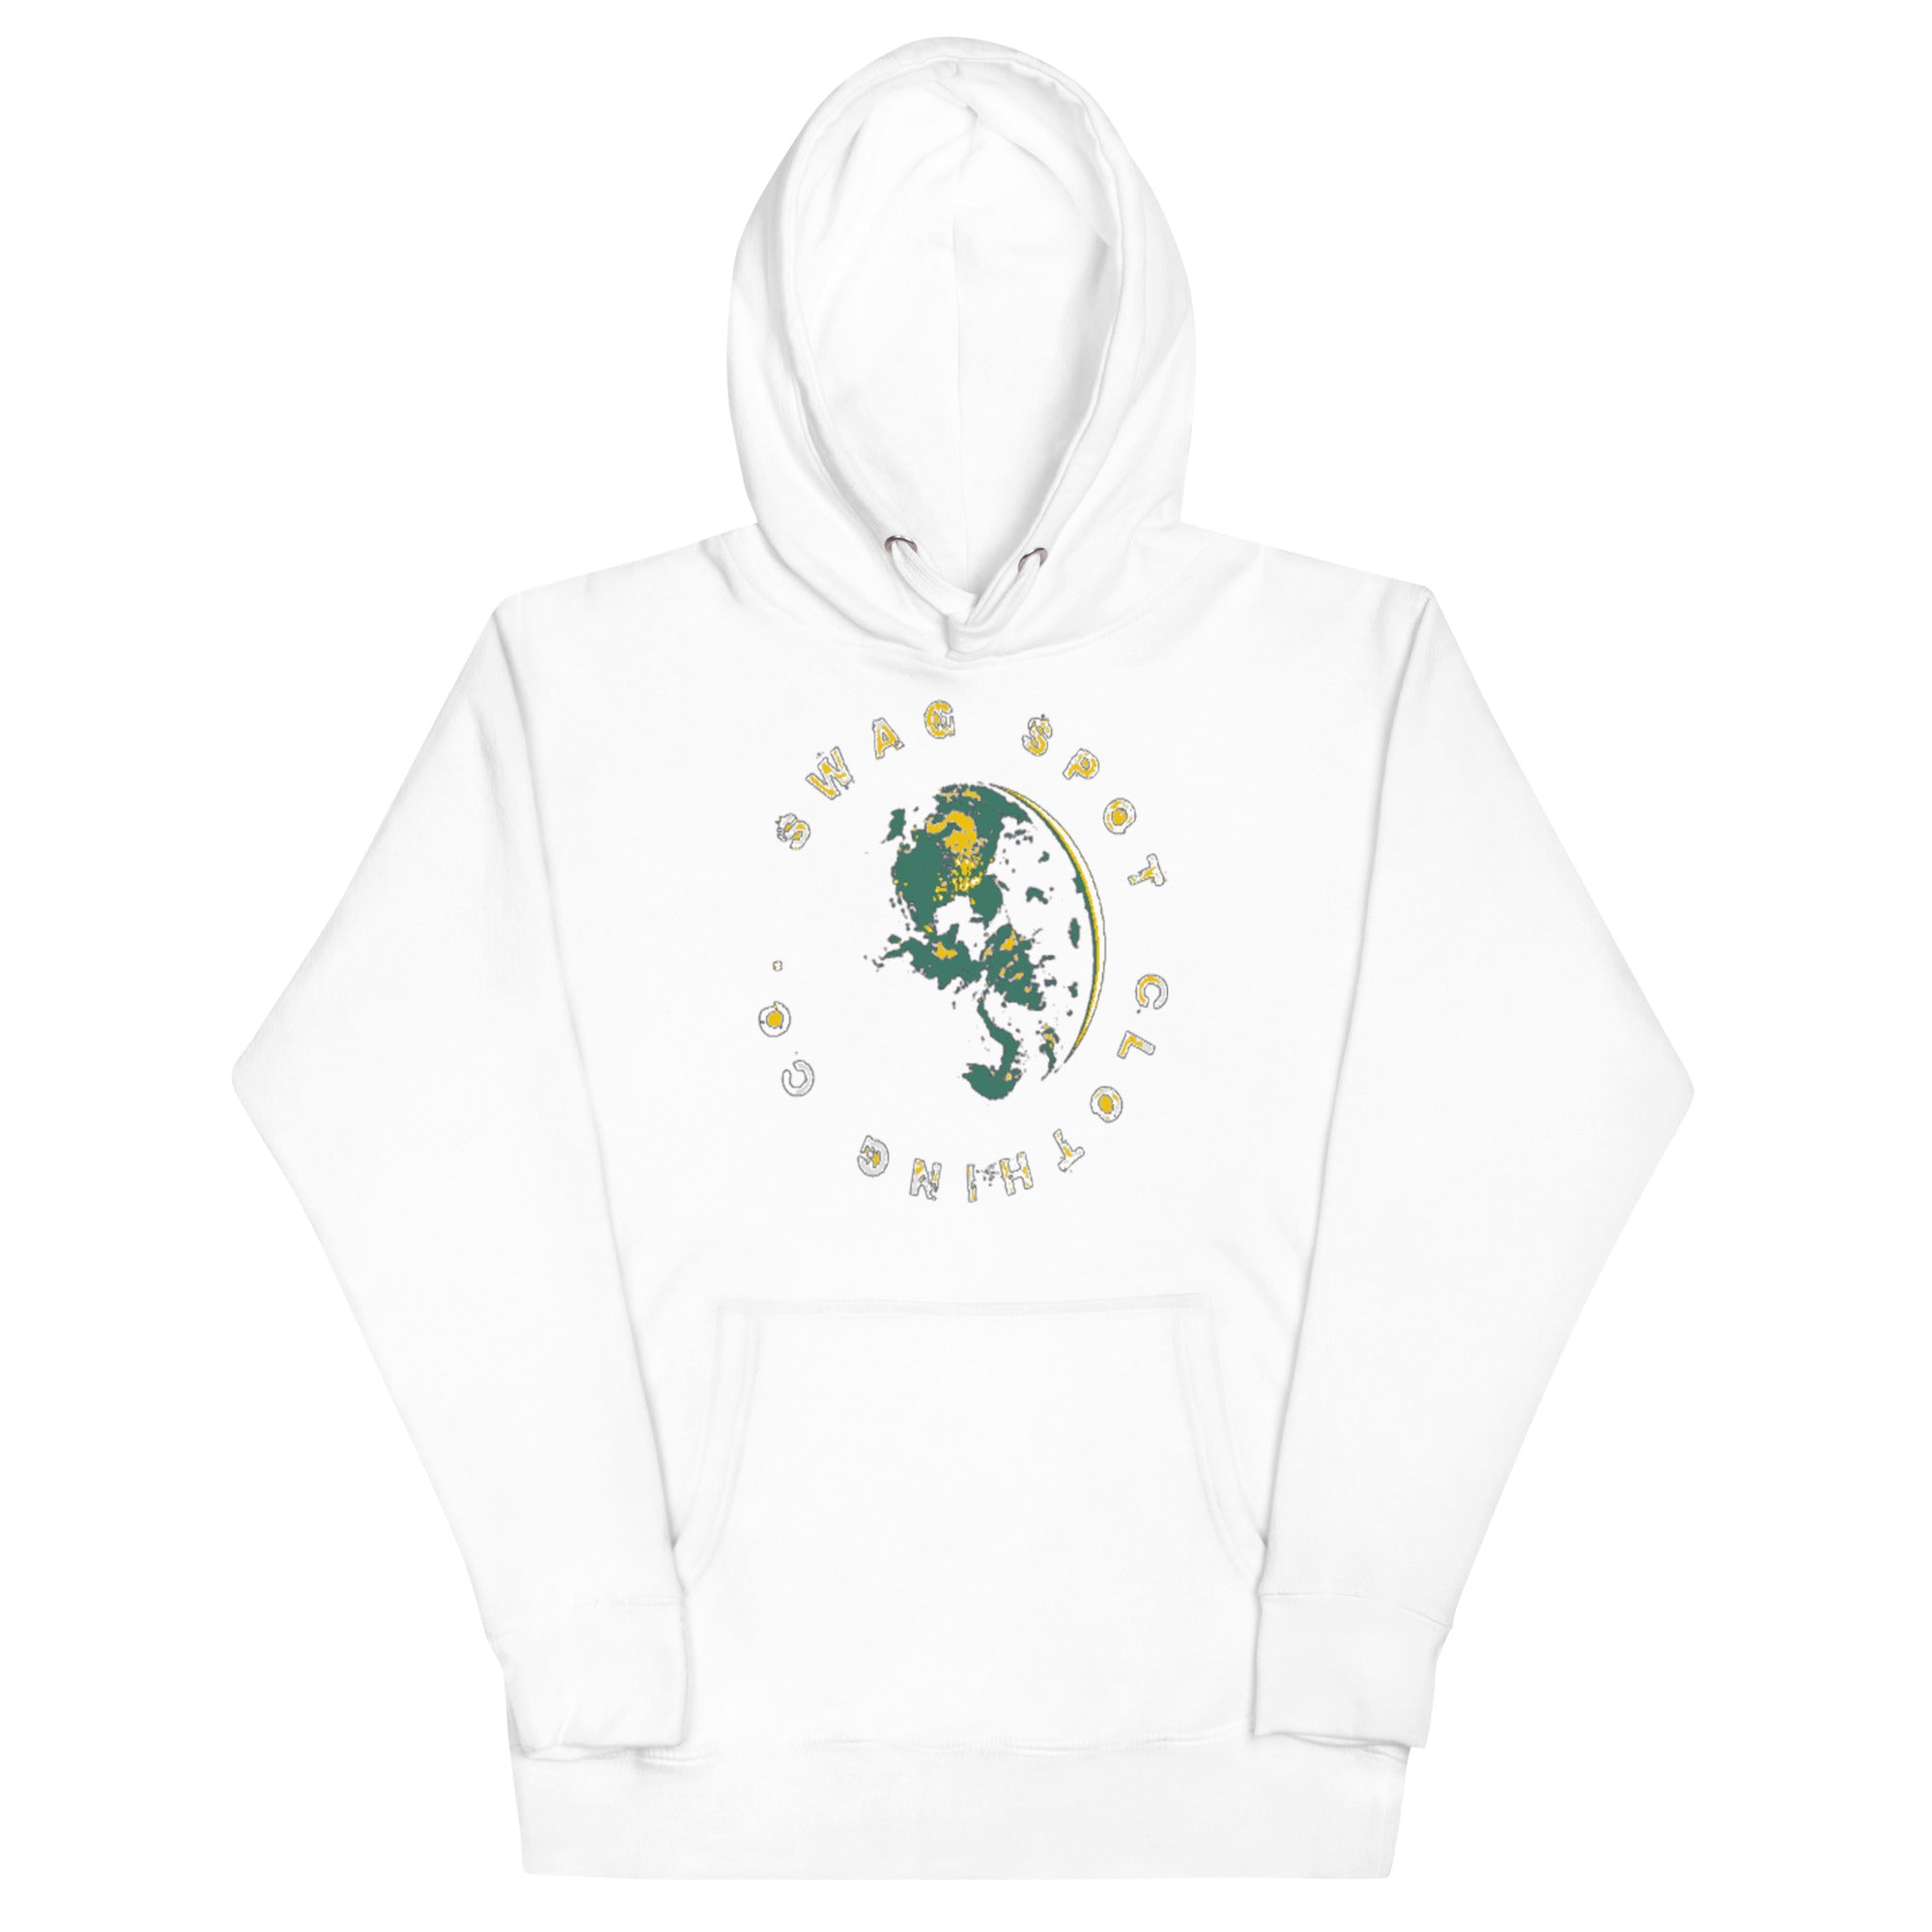 Swag World Green Graphic Unisex Hoodie - Swag Spot Clothing Co